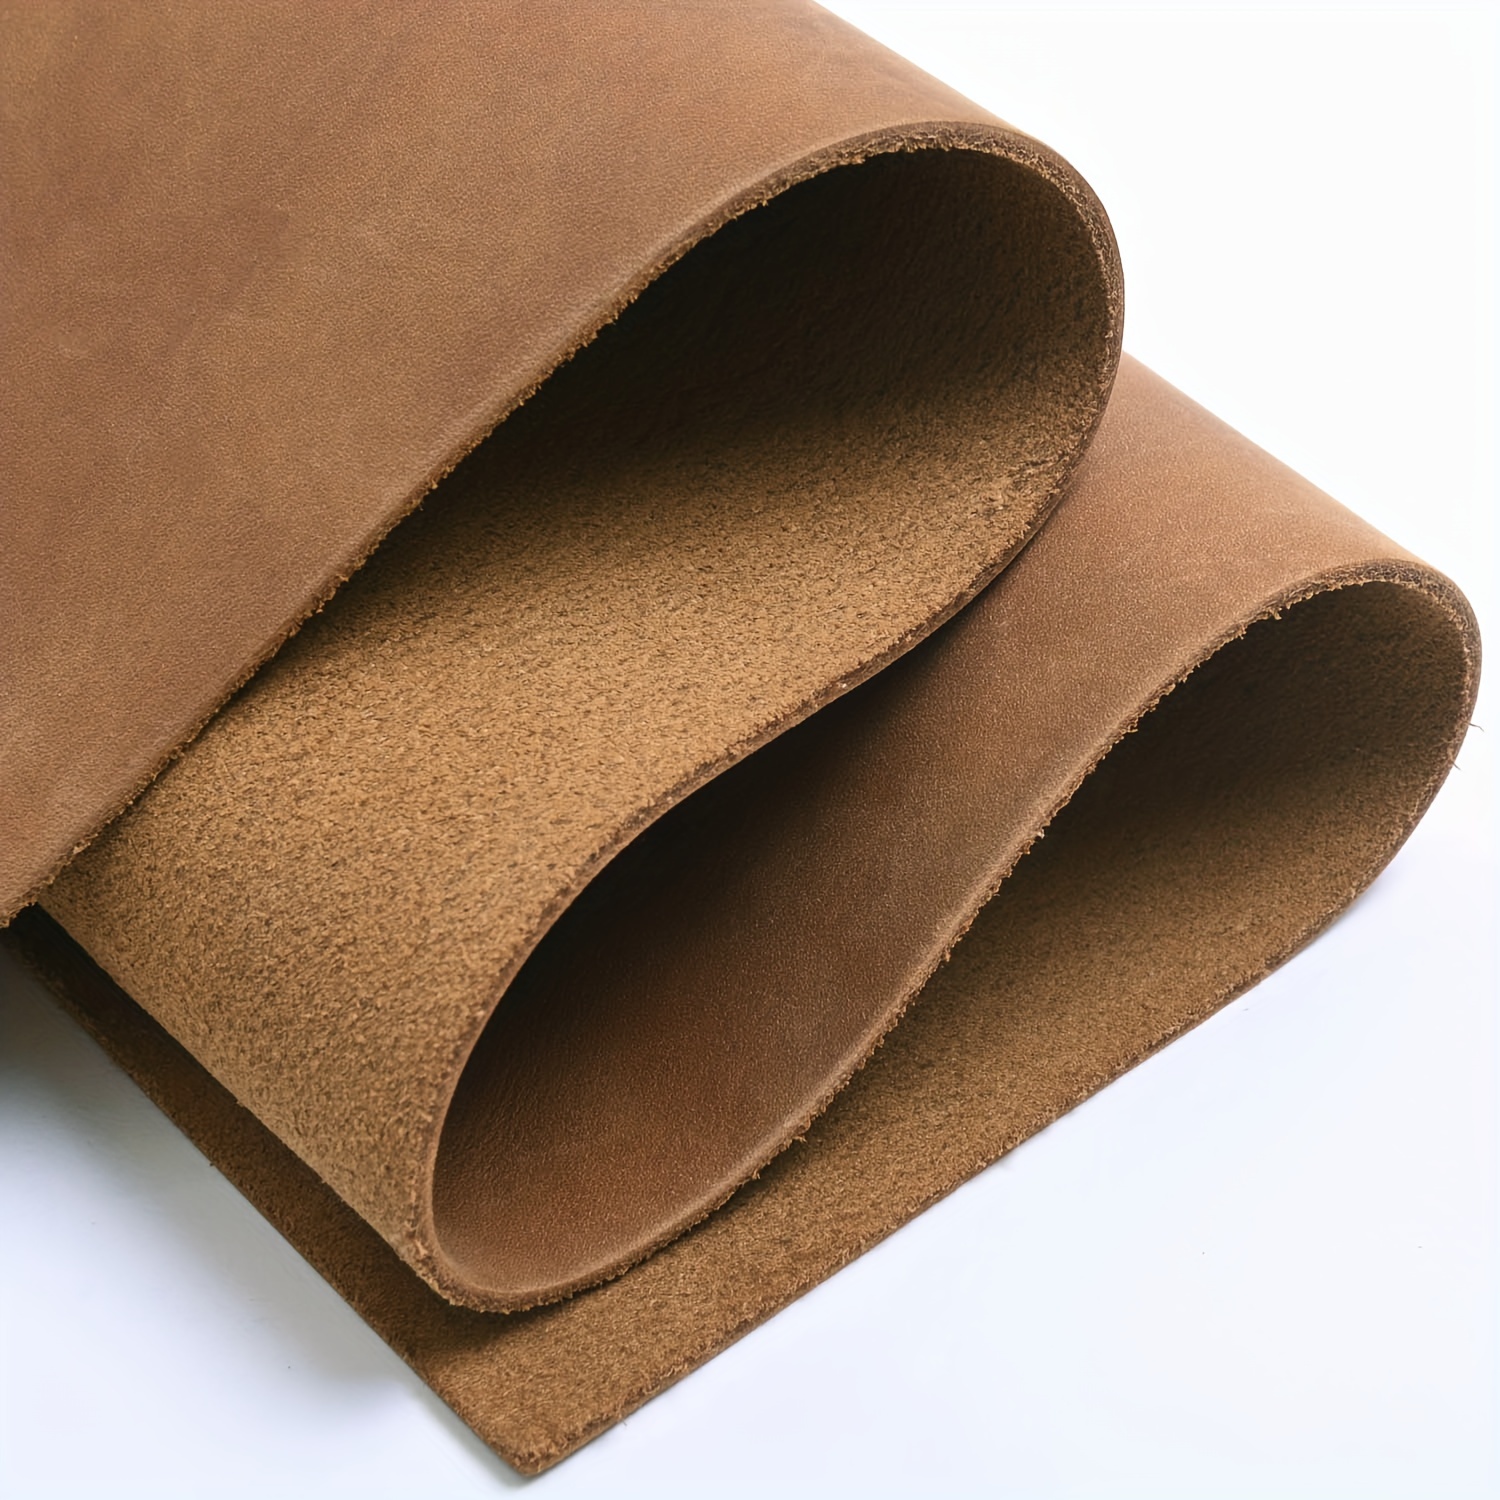 Light BROWN leather sheet 6x6/8x10/12x12 inch genuine leather